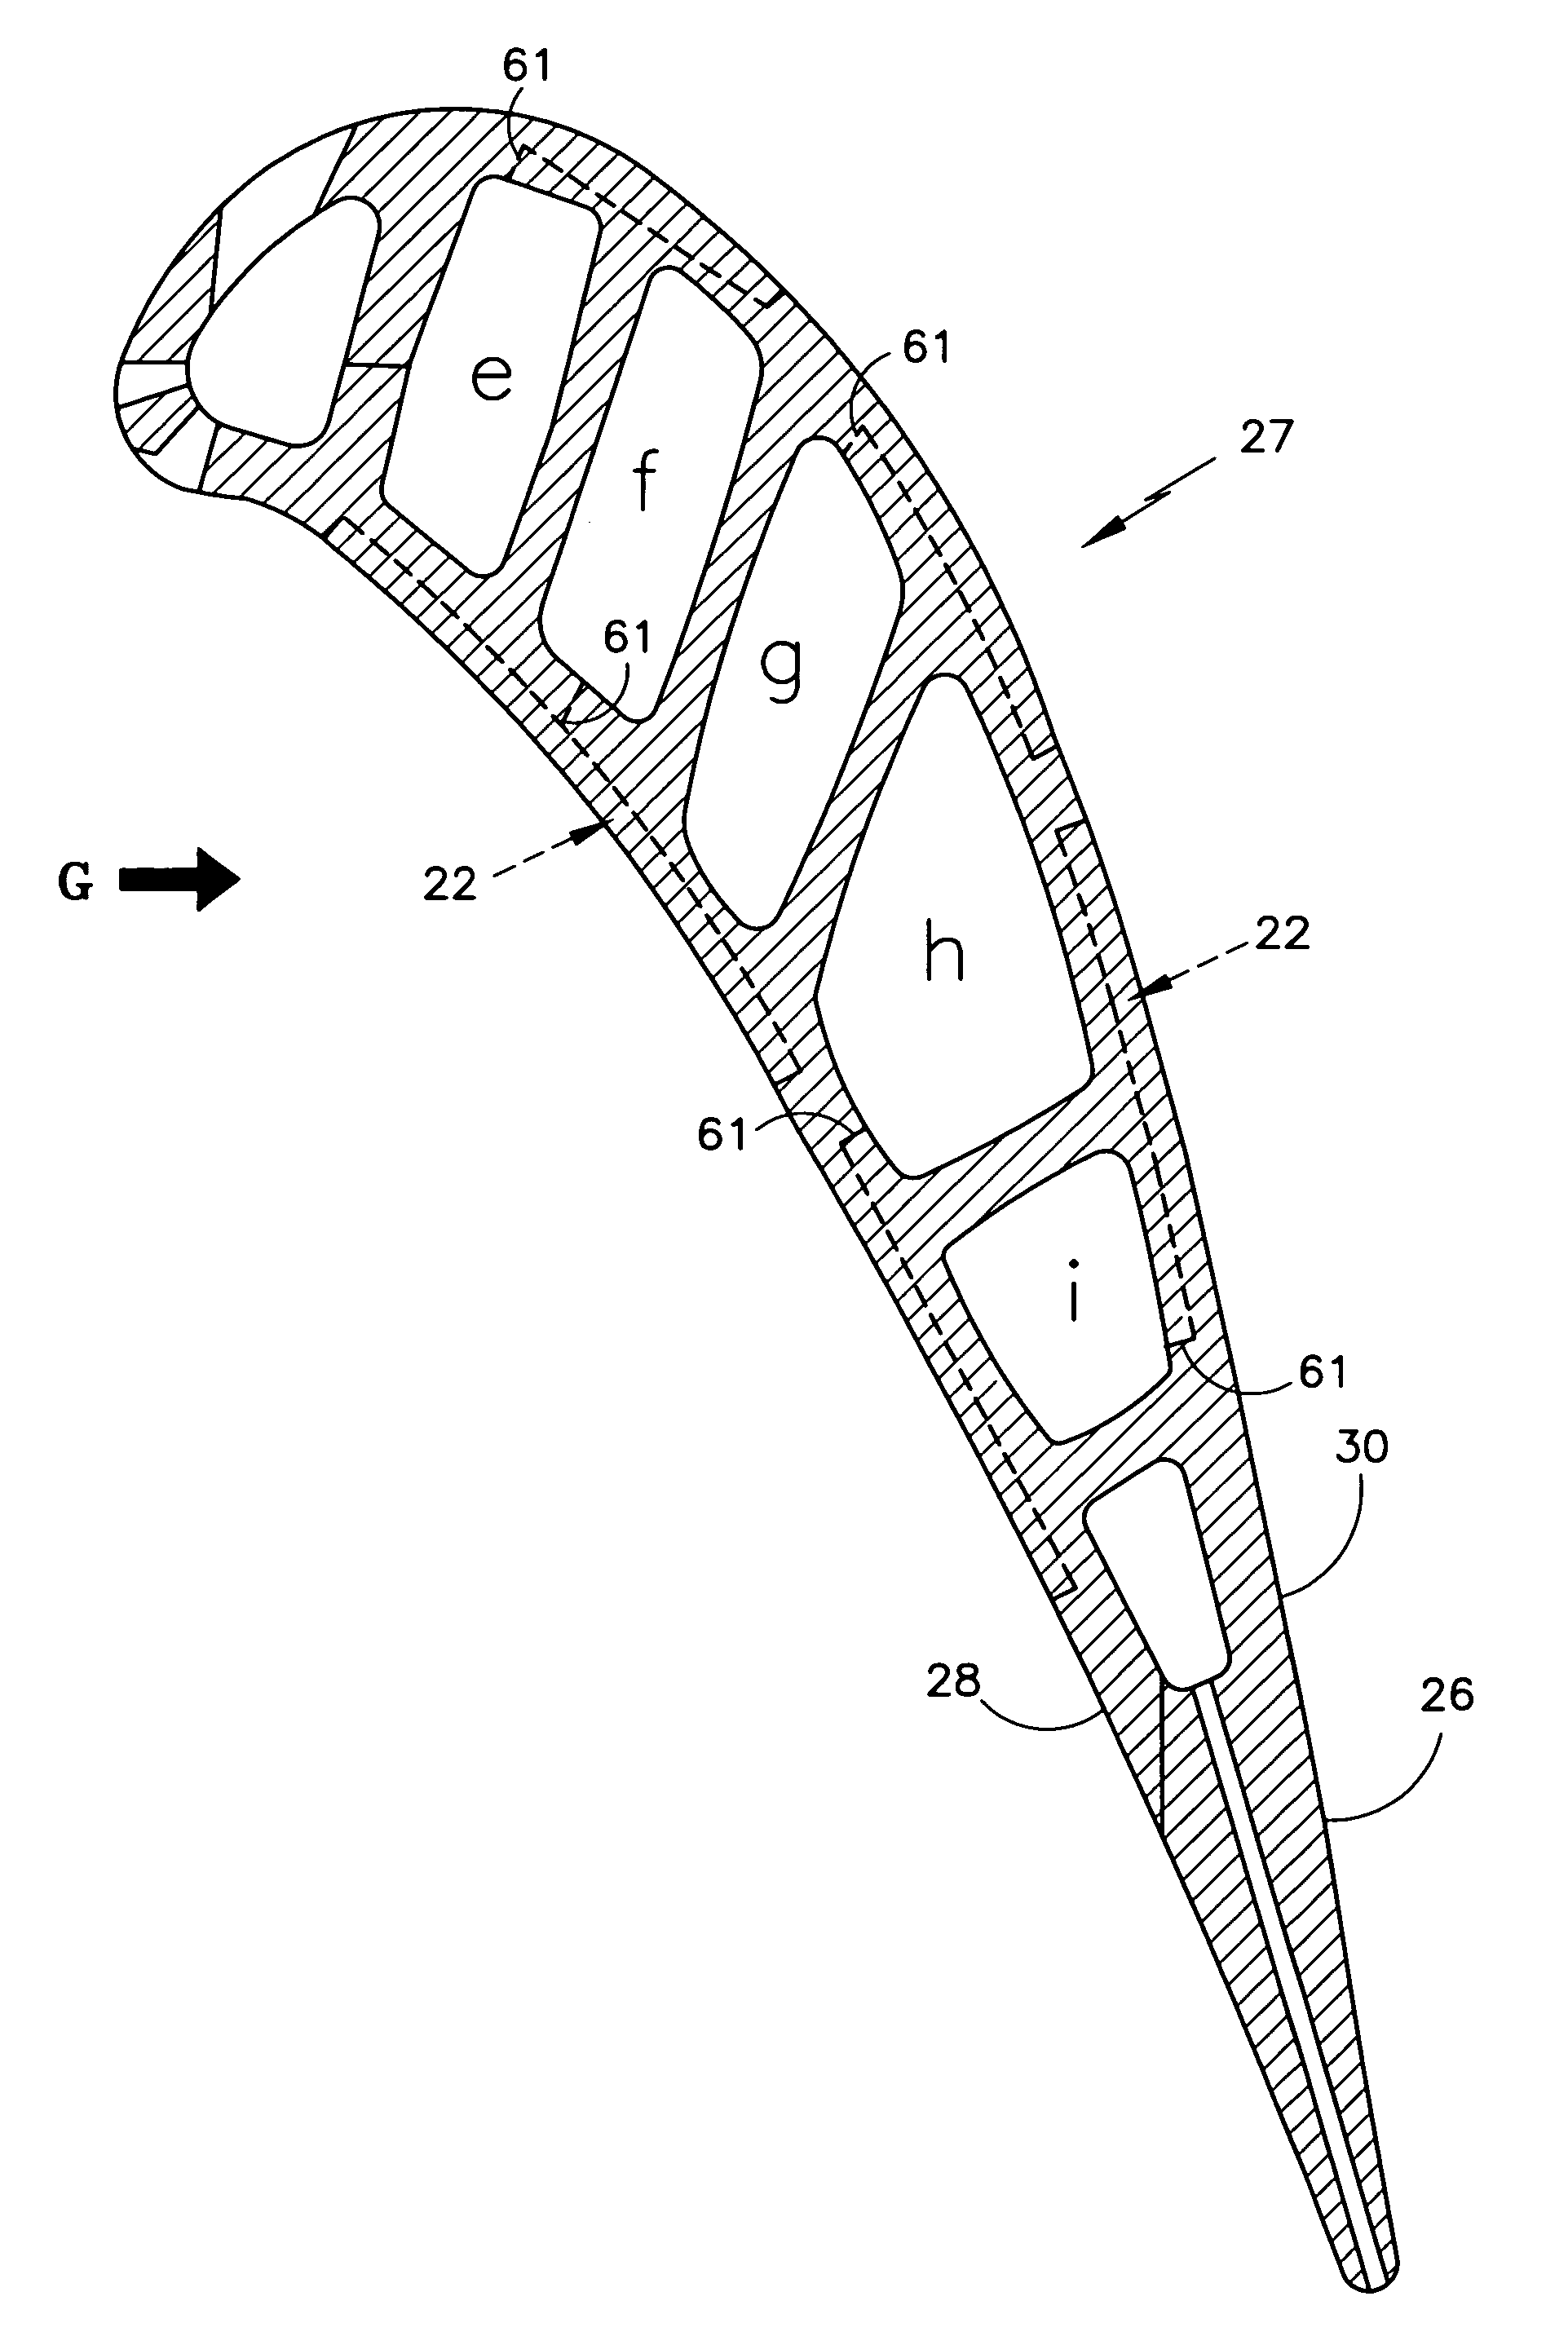 Microcircuit cooling for a turbine airfoil